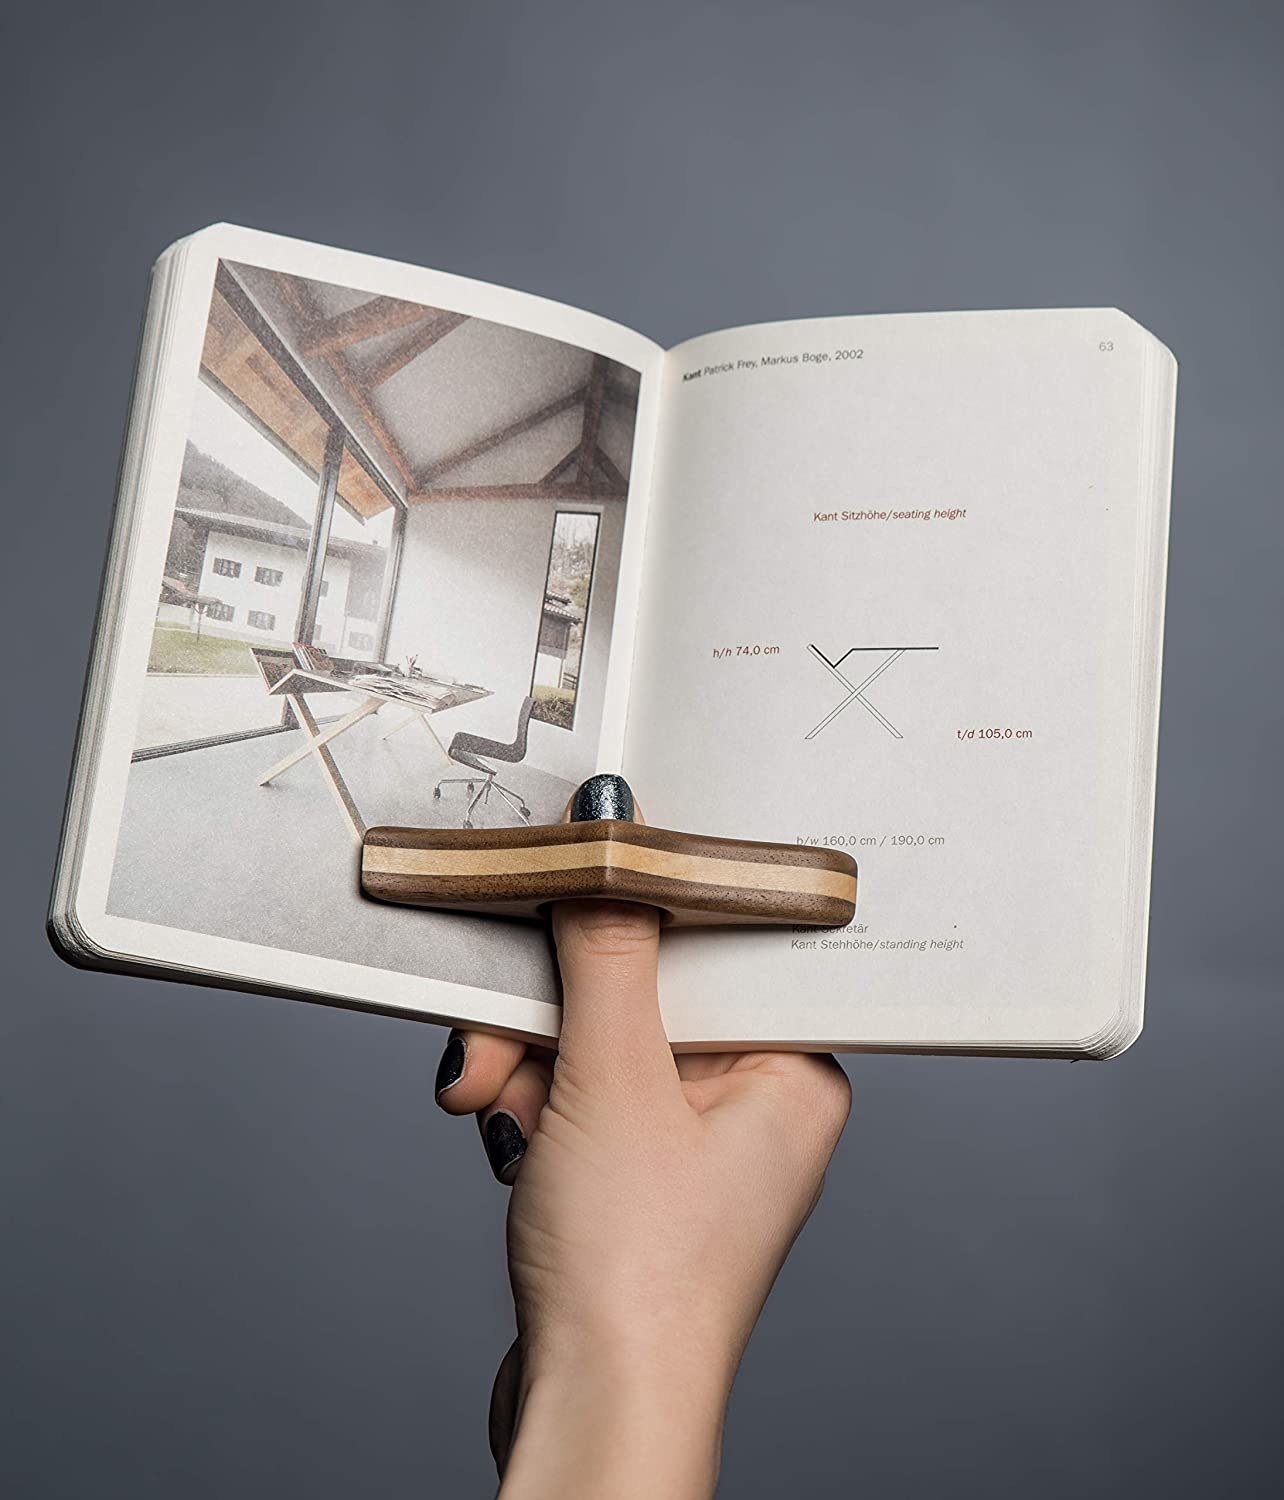 A hand using the tool to prop open a book